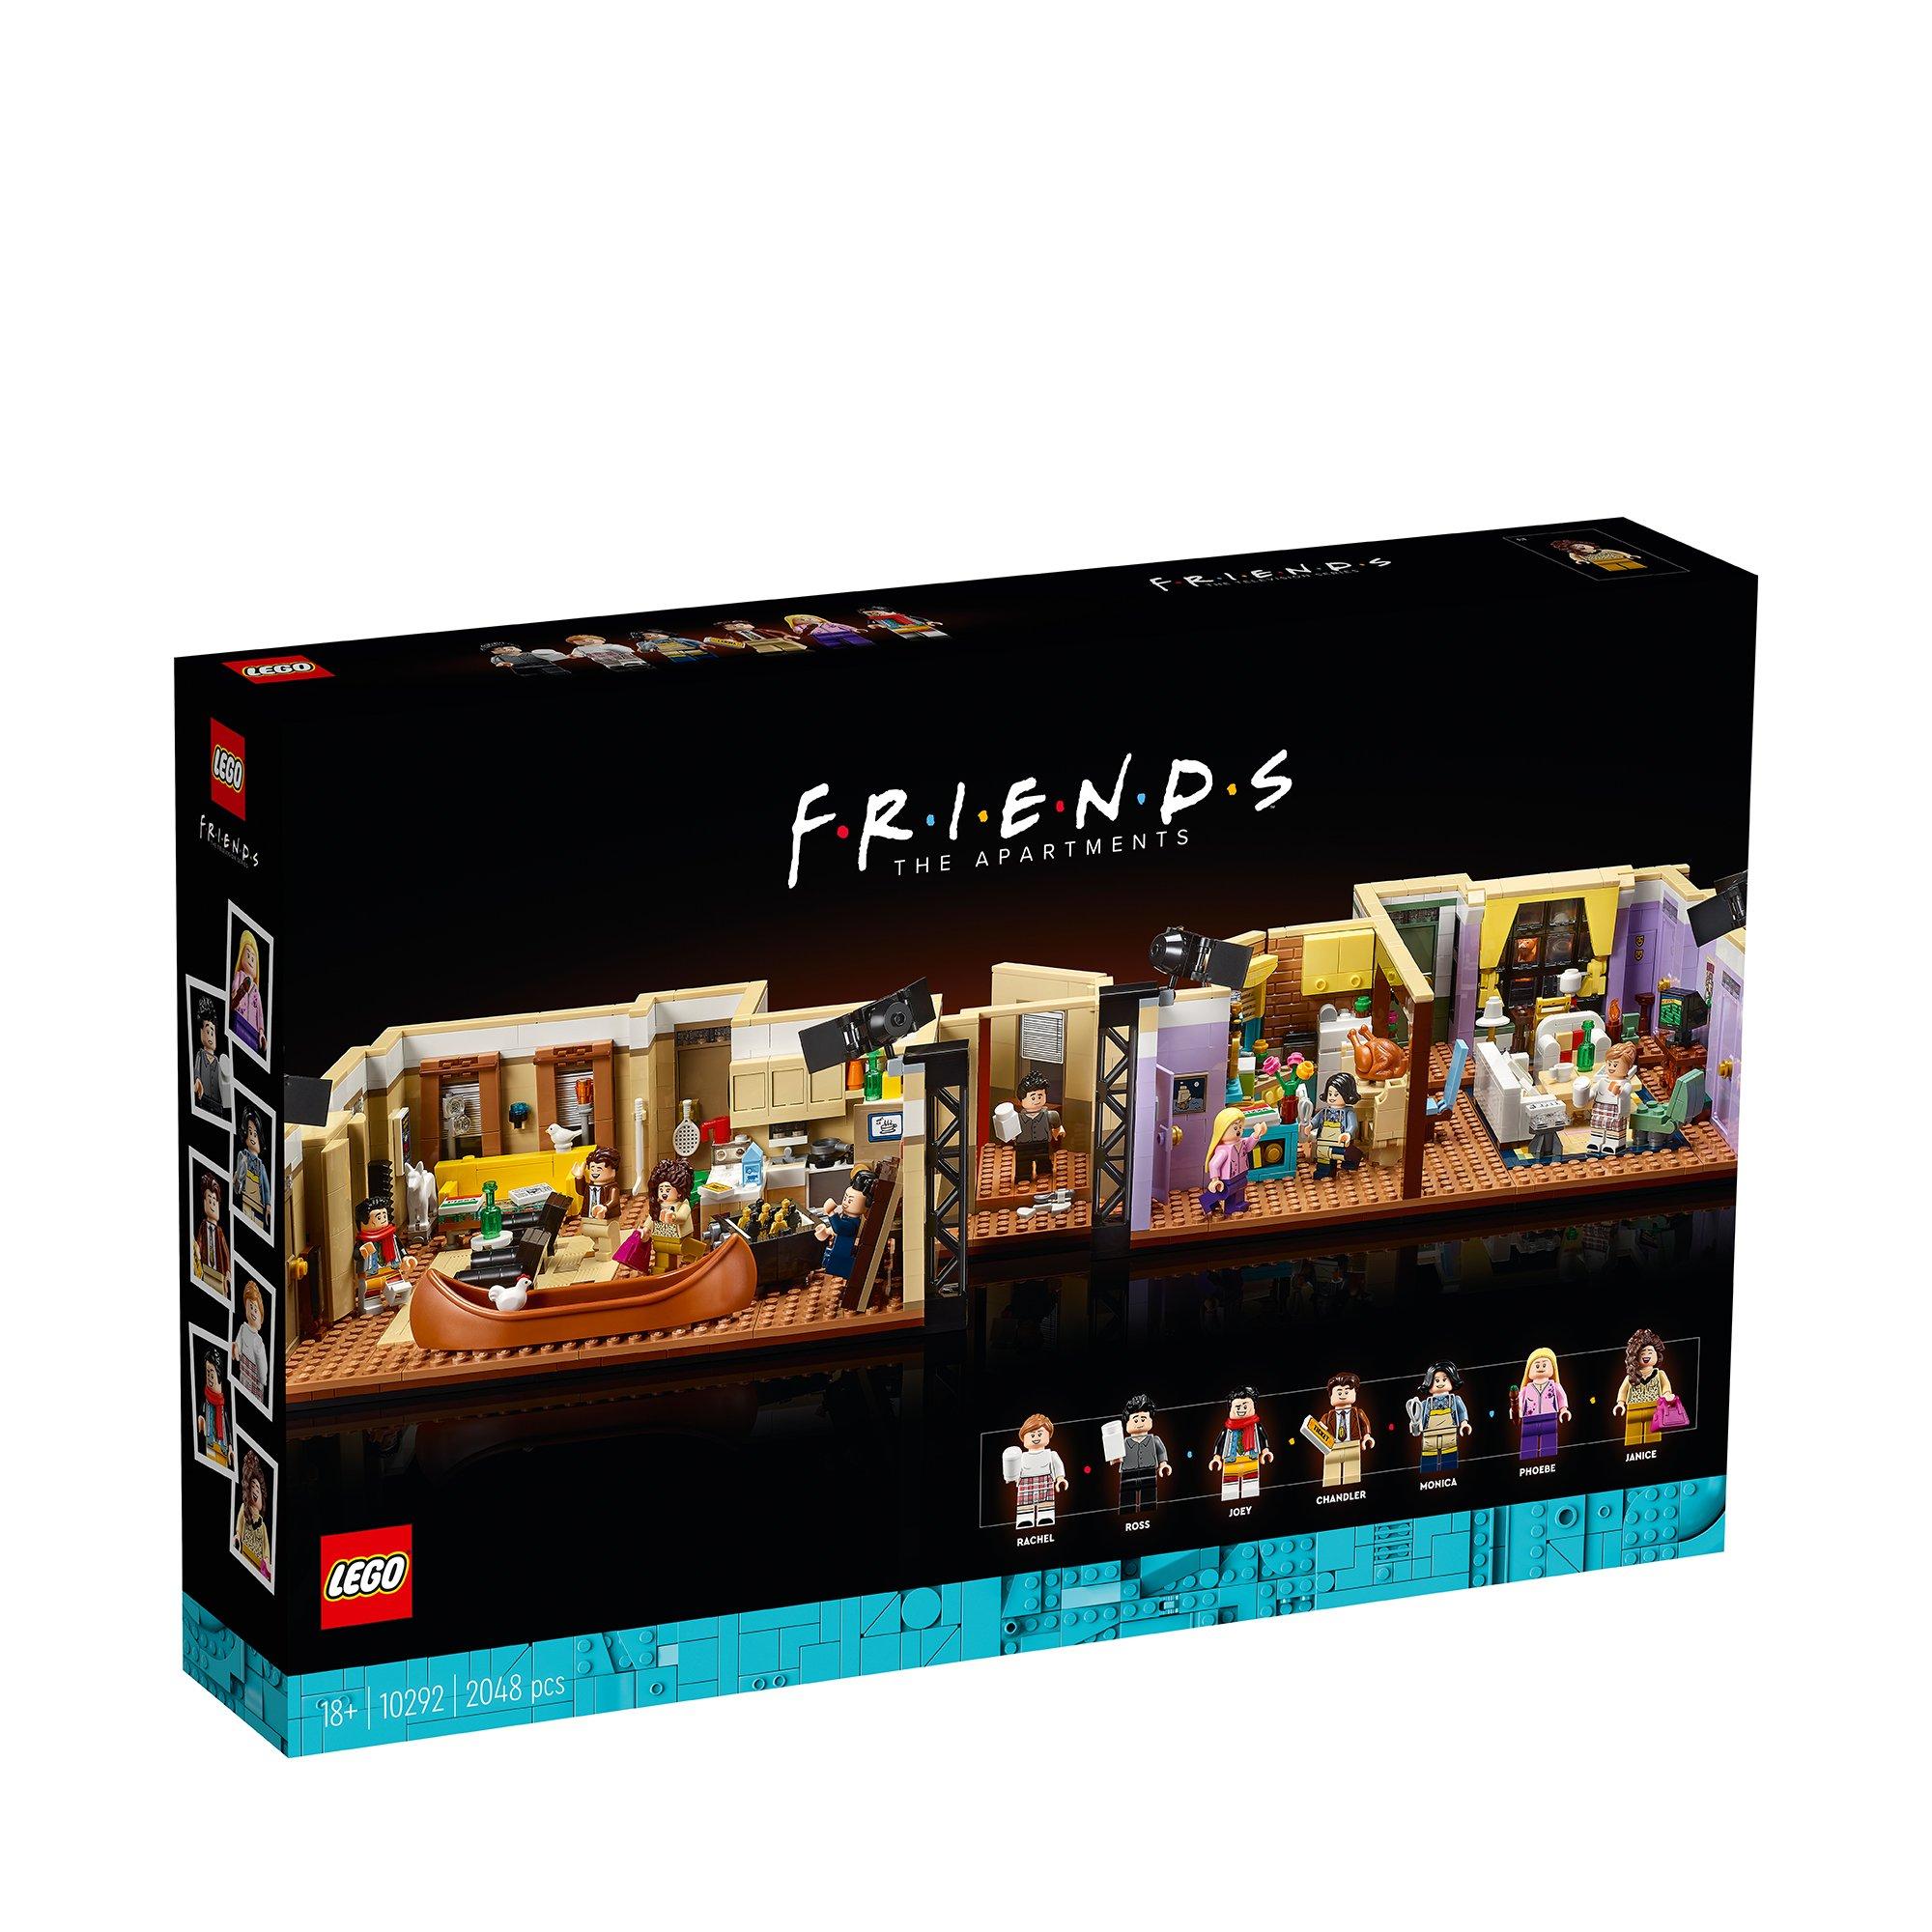 Image of LEGO 10292 Friends Apartments